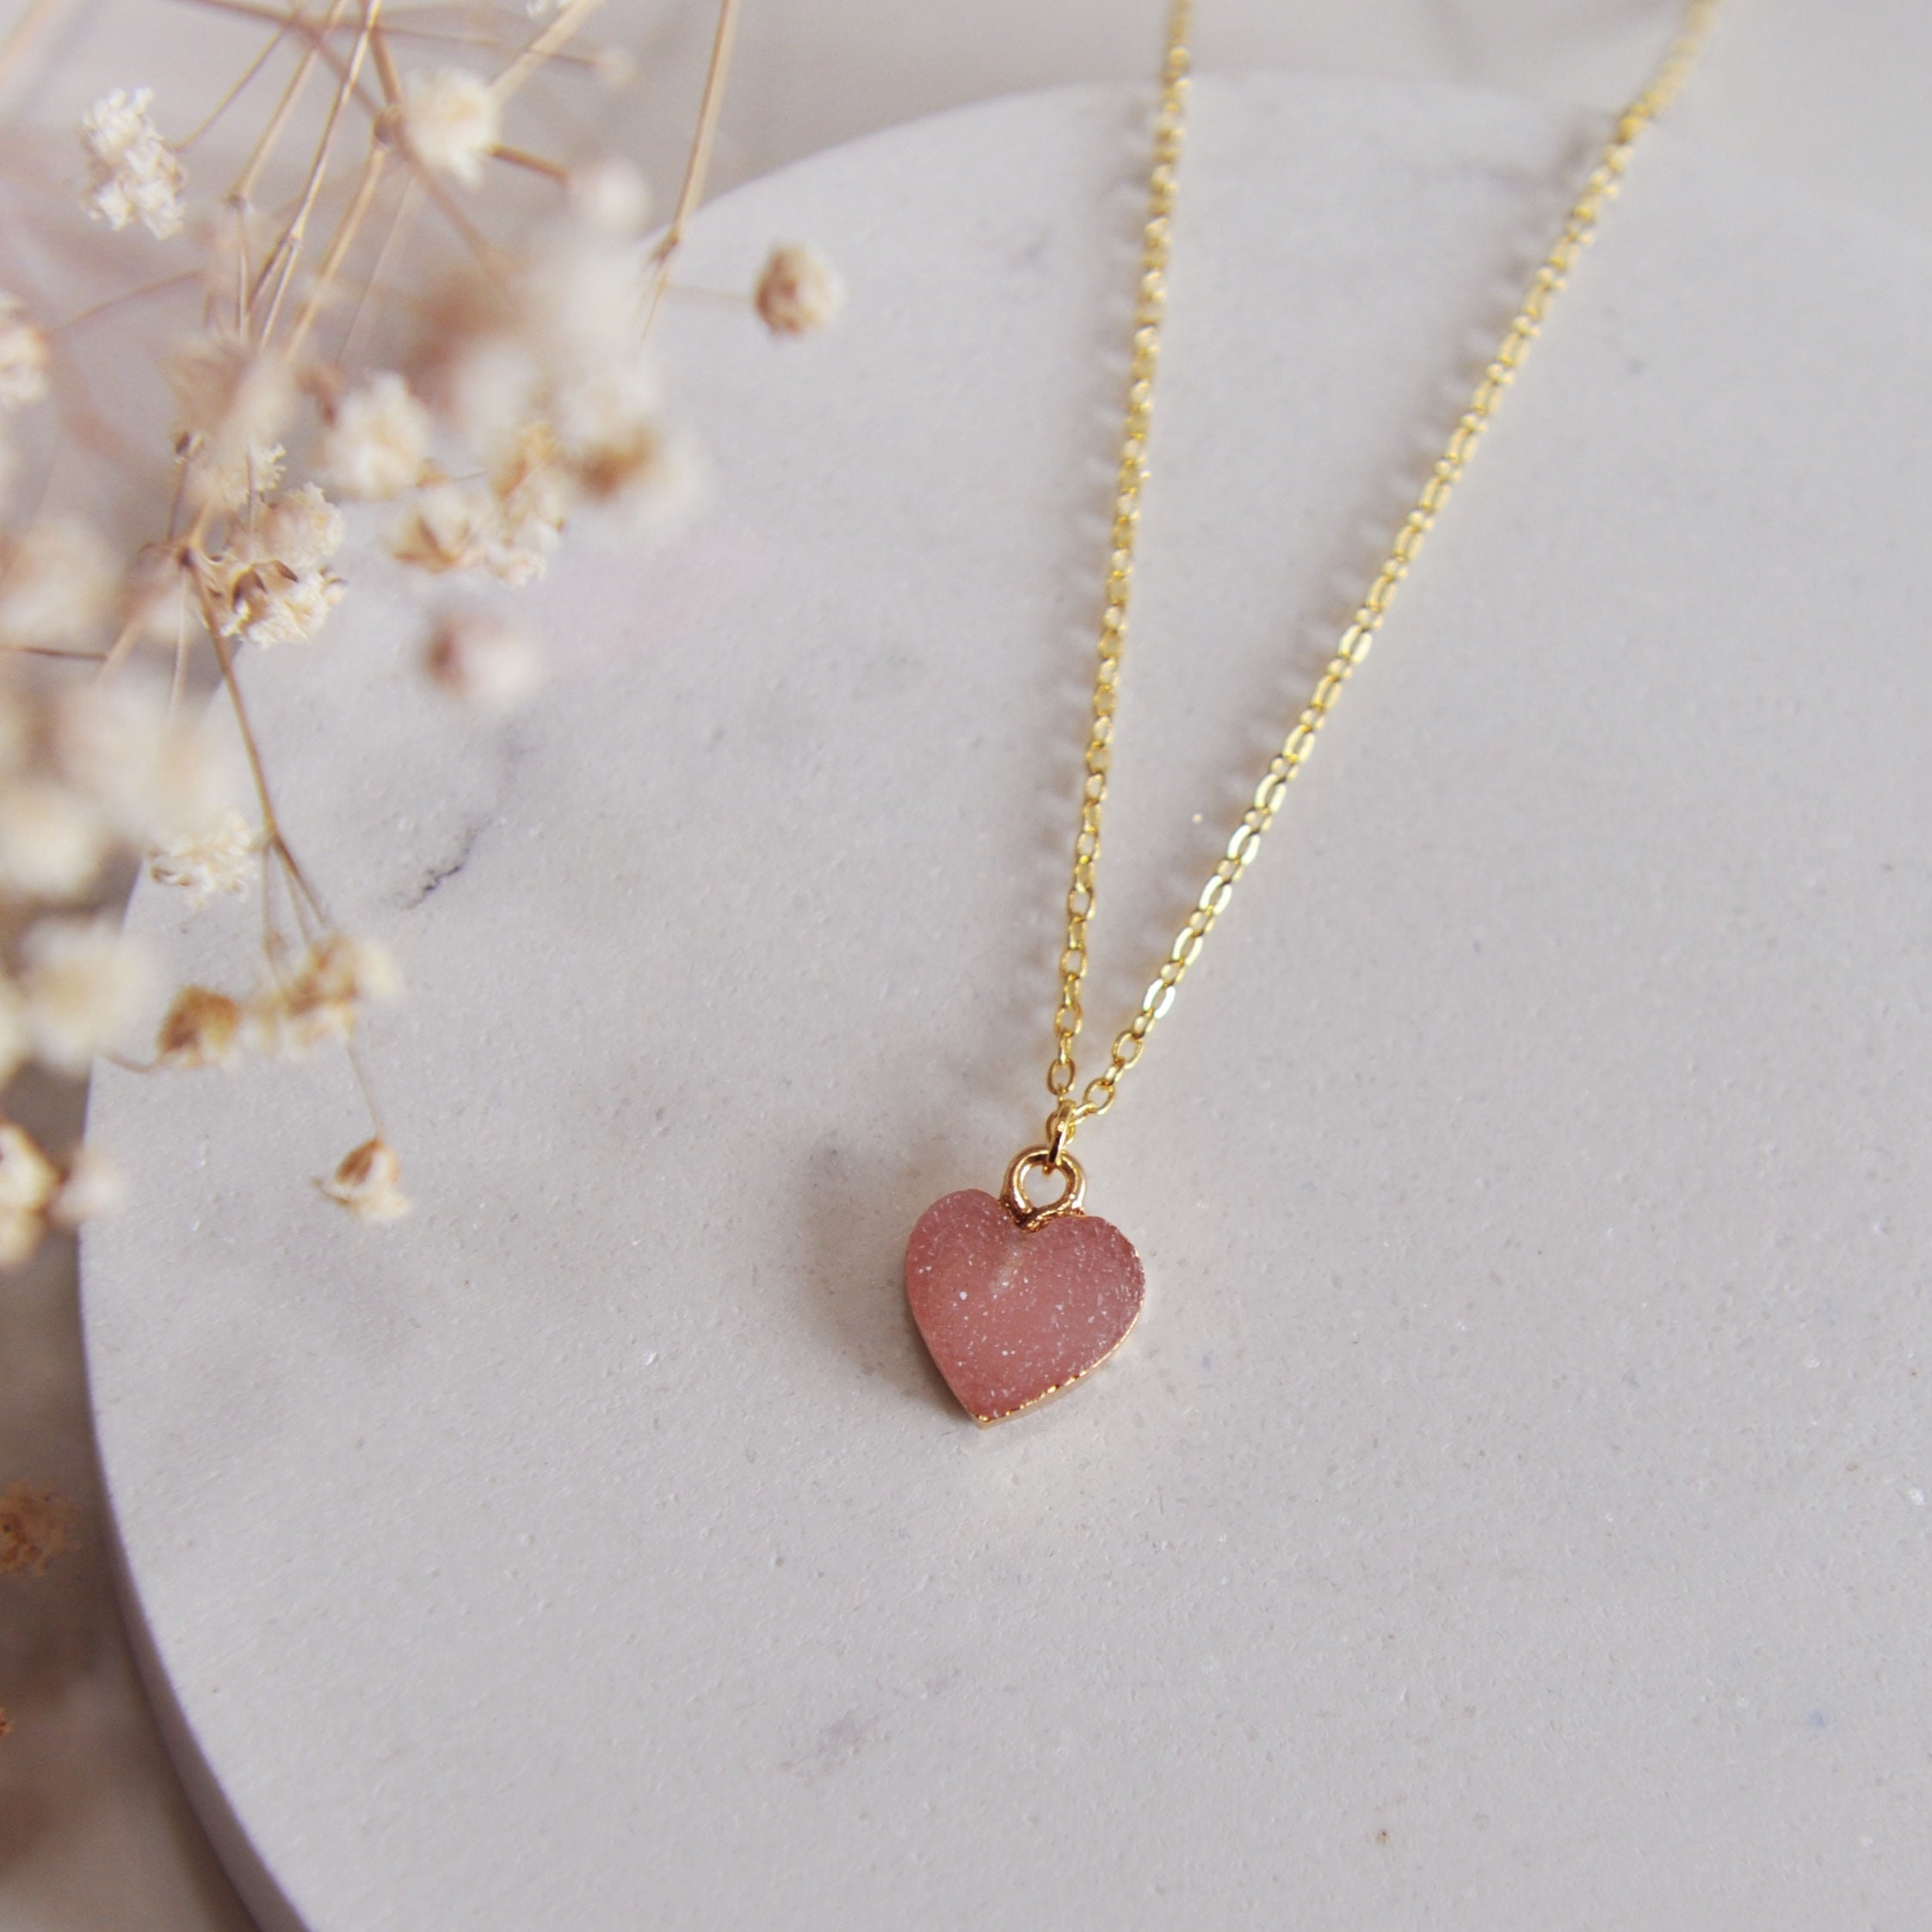 Heart CC Button Necklaces - Pink or Black